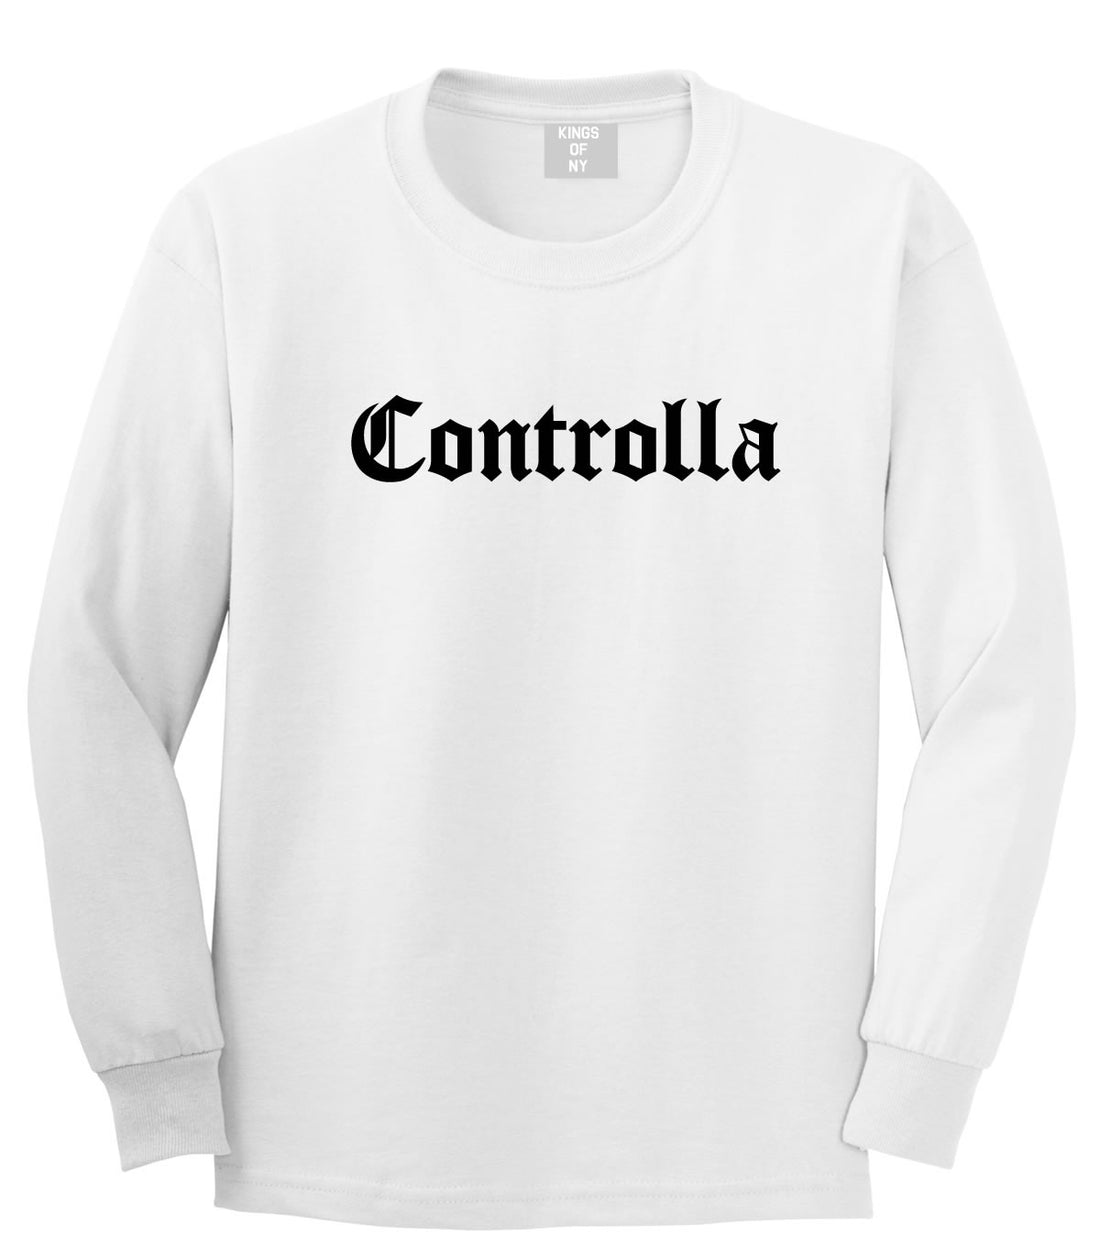 Controlla Long Sleeve T-Shirt By Kings Of NY